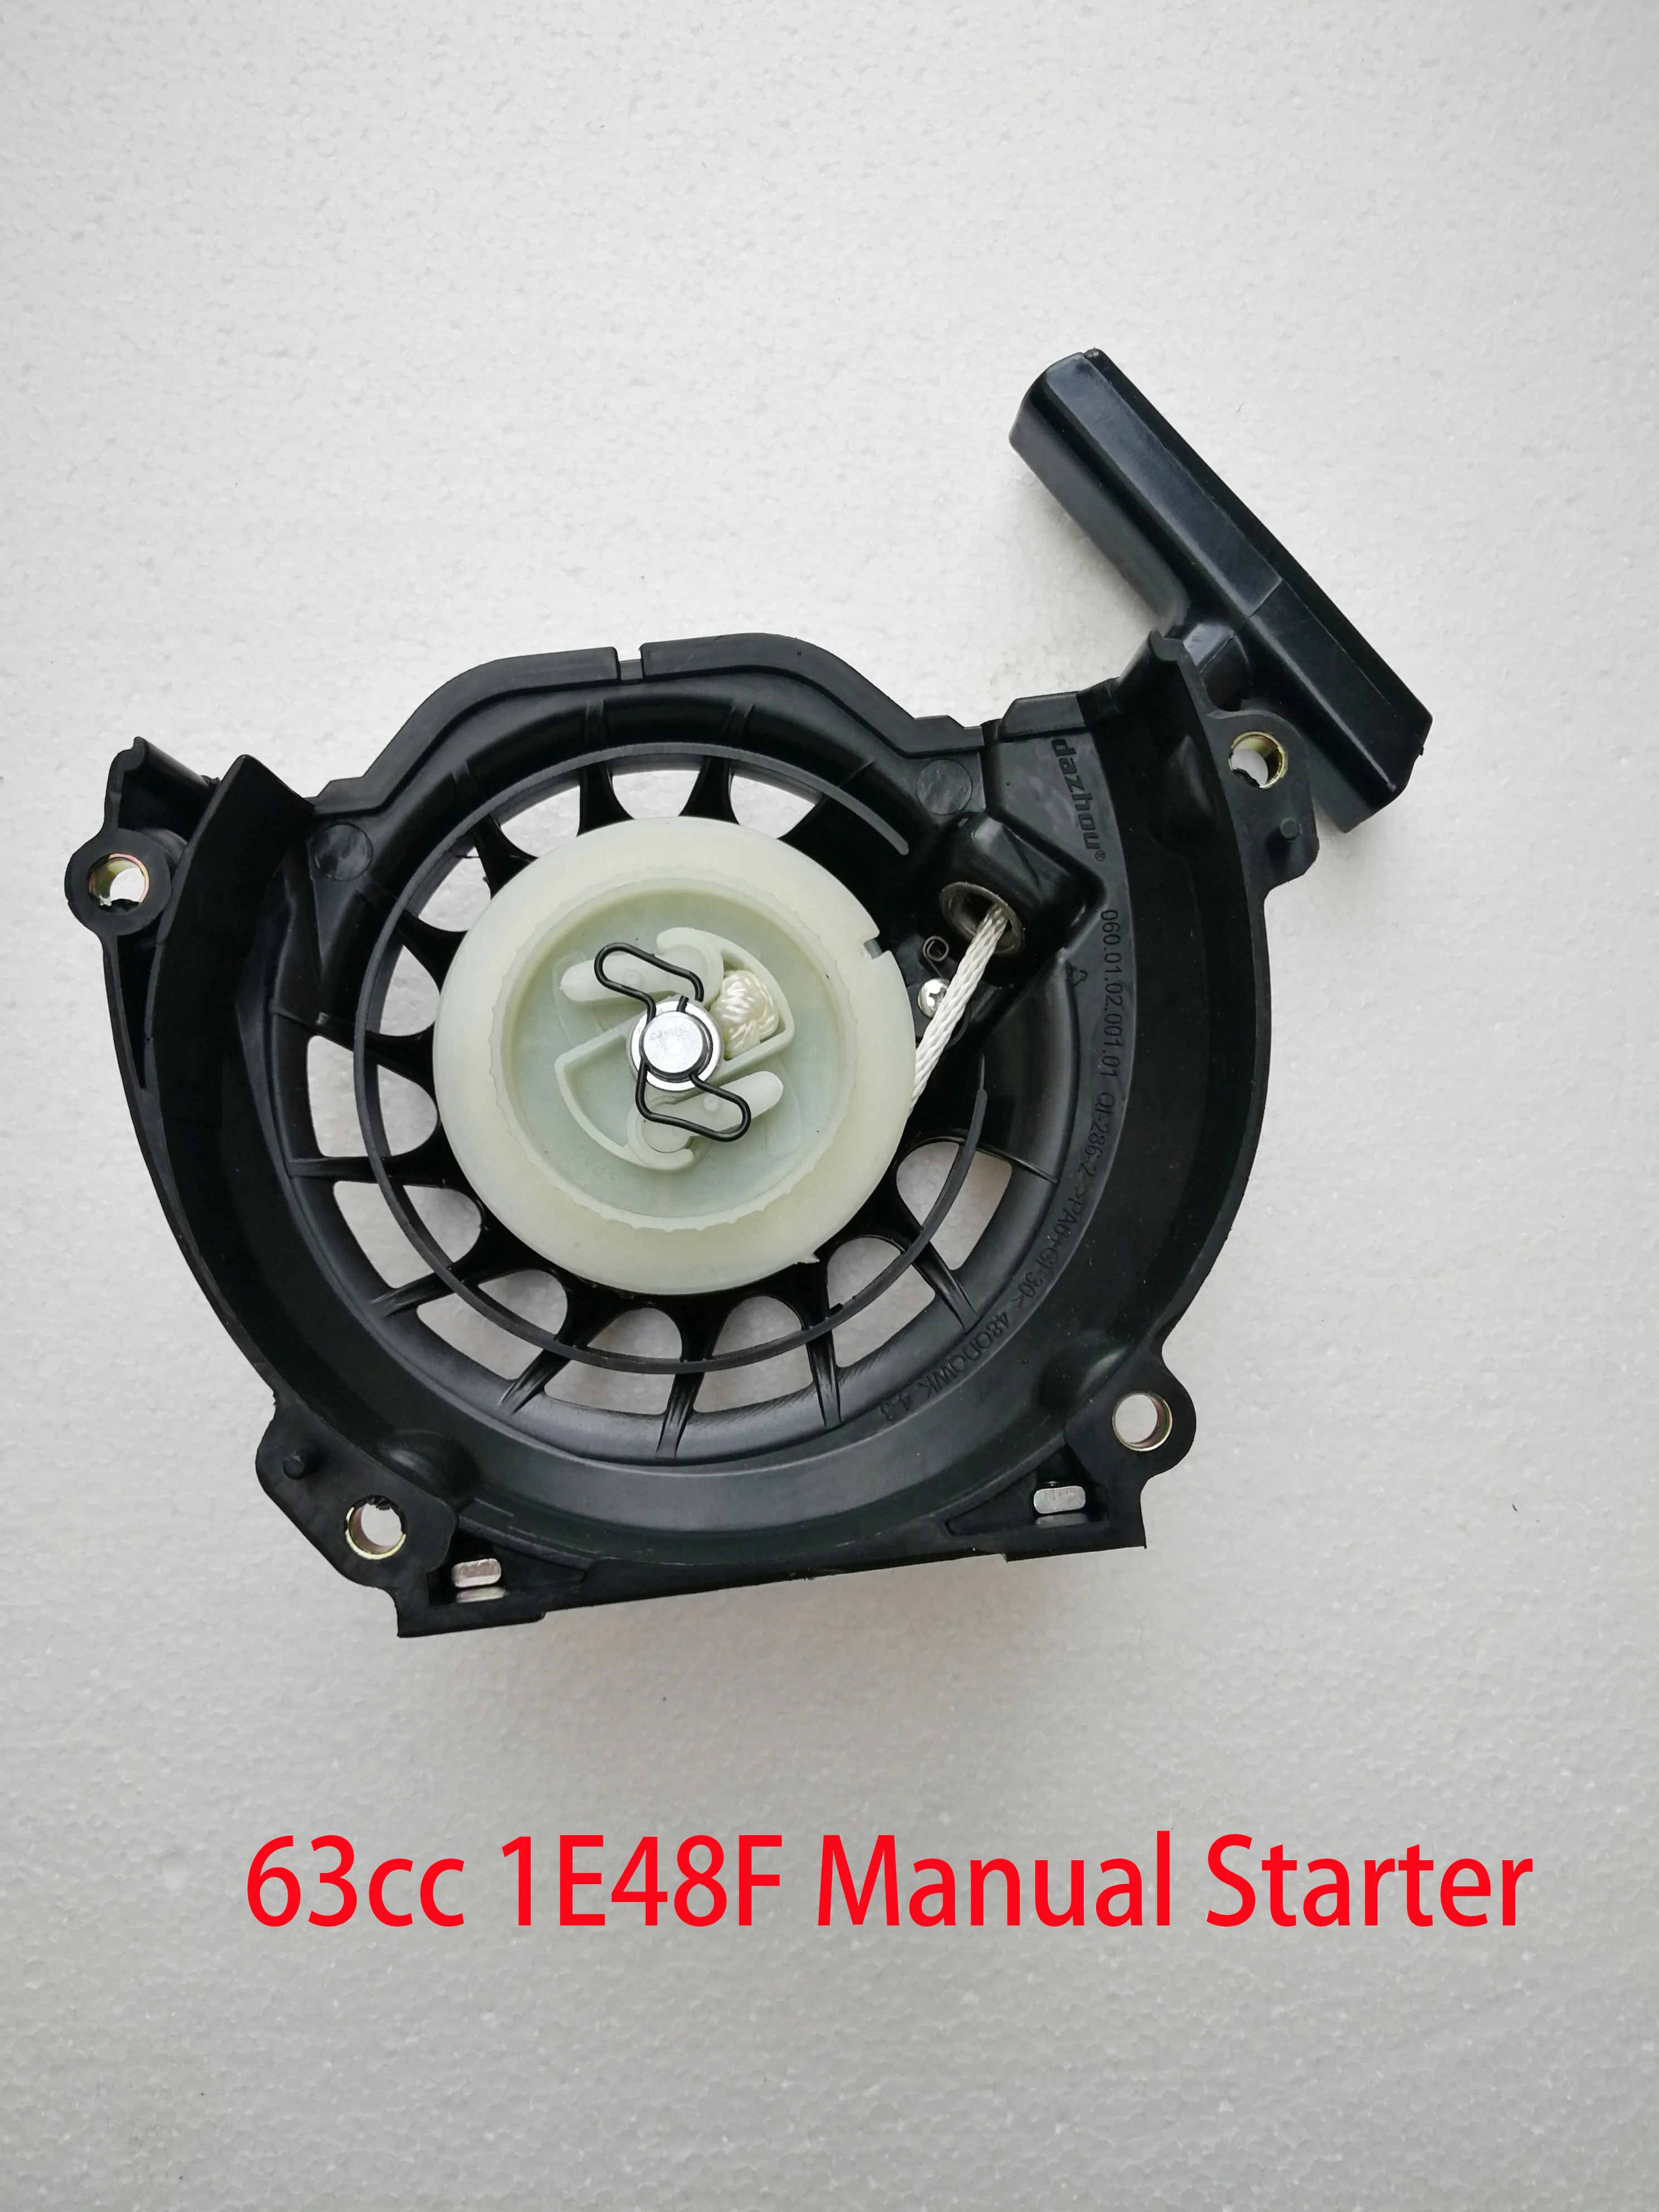 Durable DaZhou Black Color Manual Puller Recoil Starter For 2T GD630 63cc 1E48F 80CC 1E53F Brush Cutter Earth Drill Goped Engine durable pro black color manual puller starter recoil for 2t 63cc 1e48f brush cutter engine motor